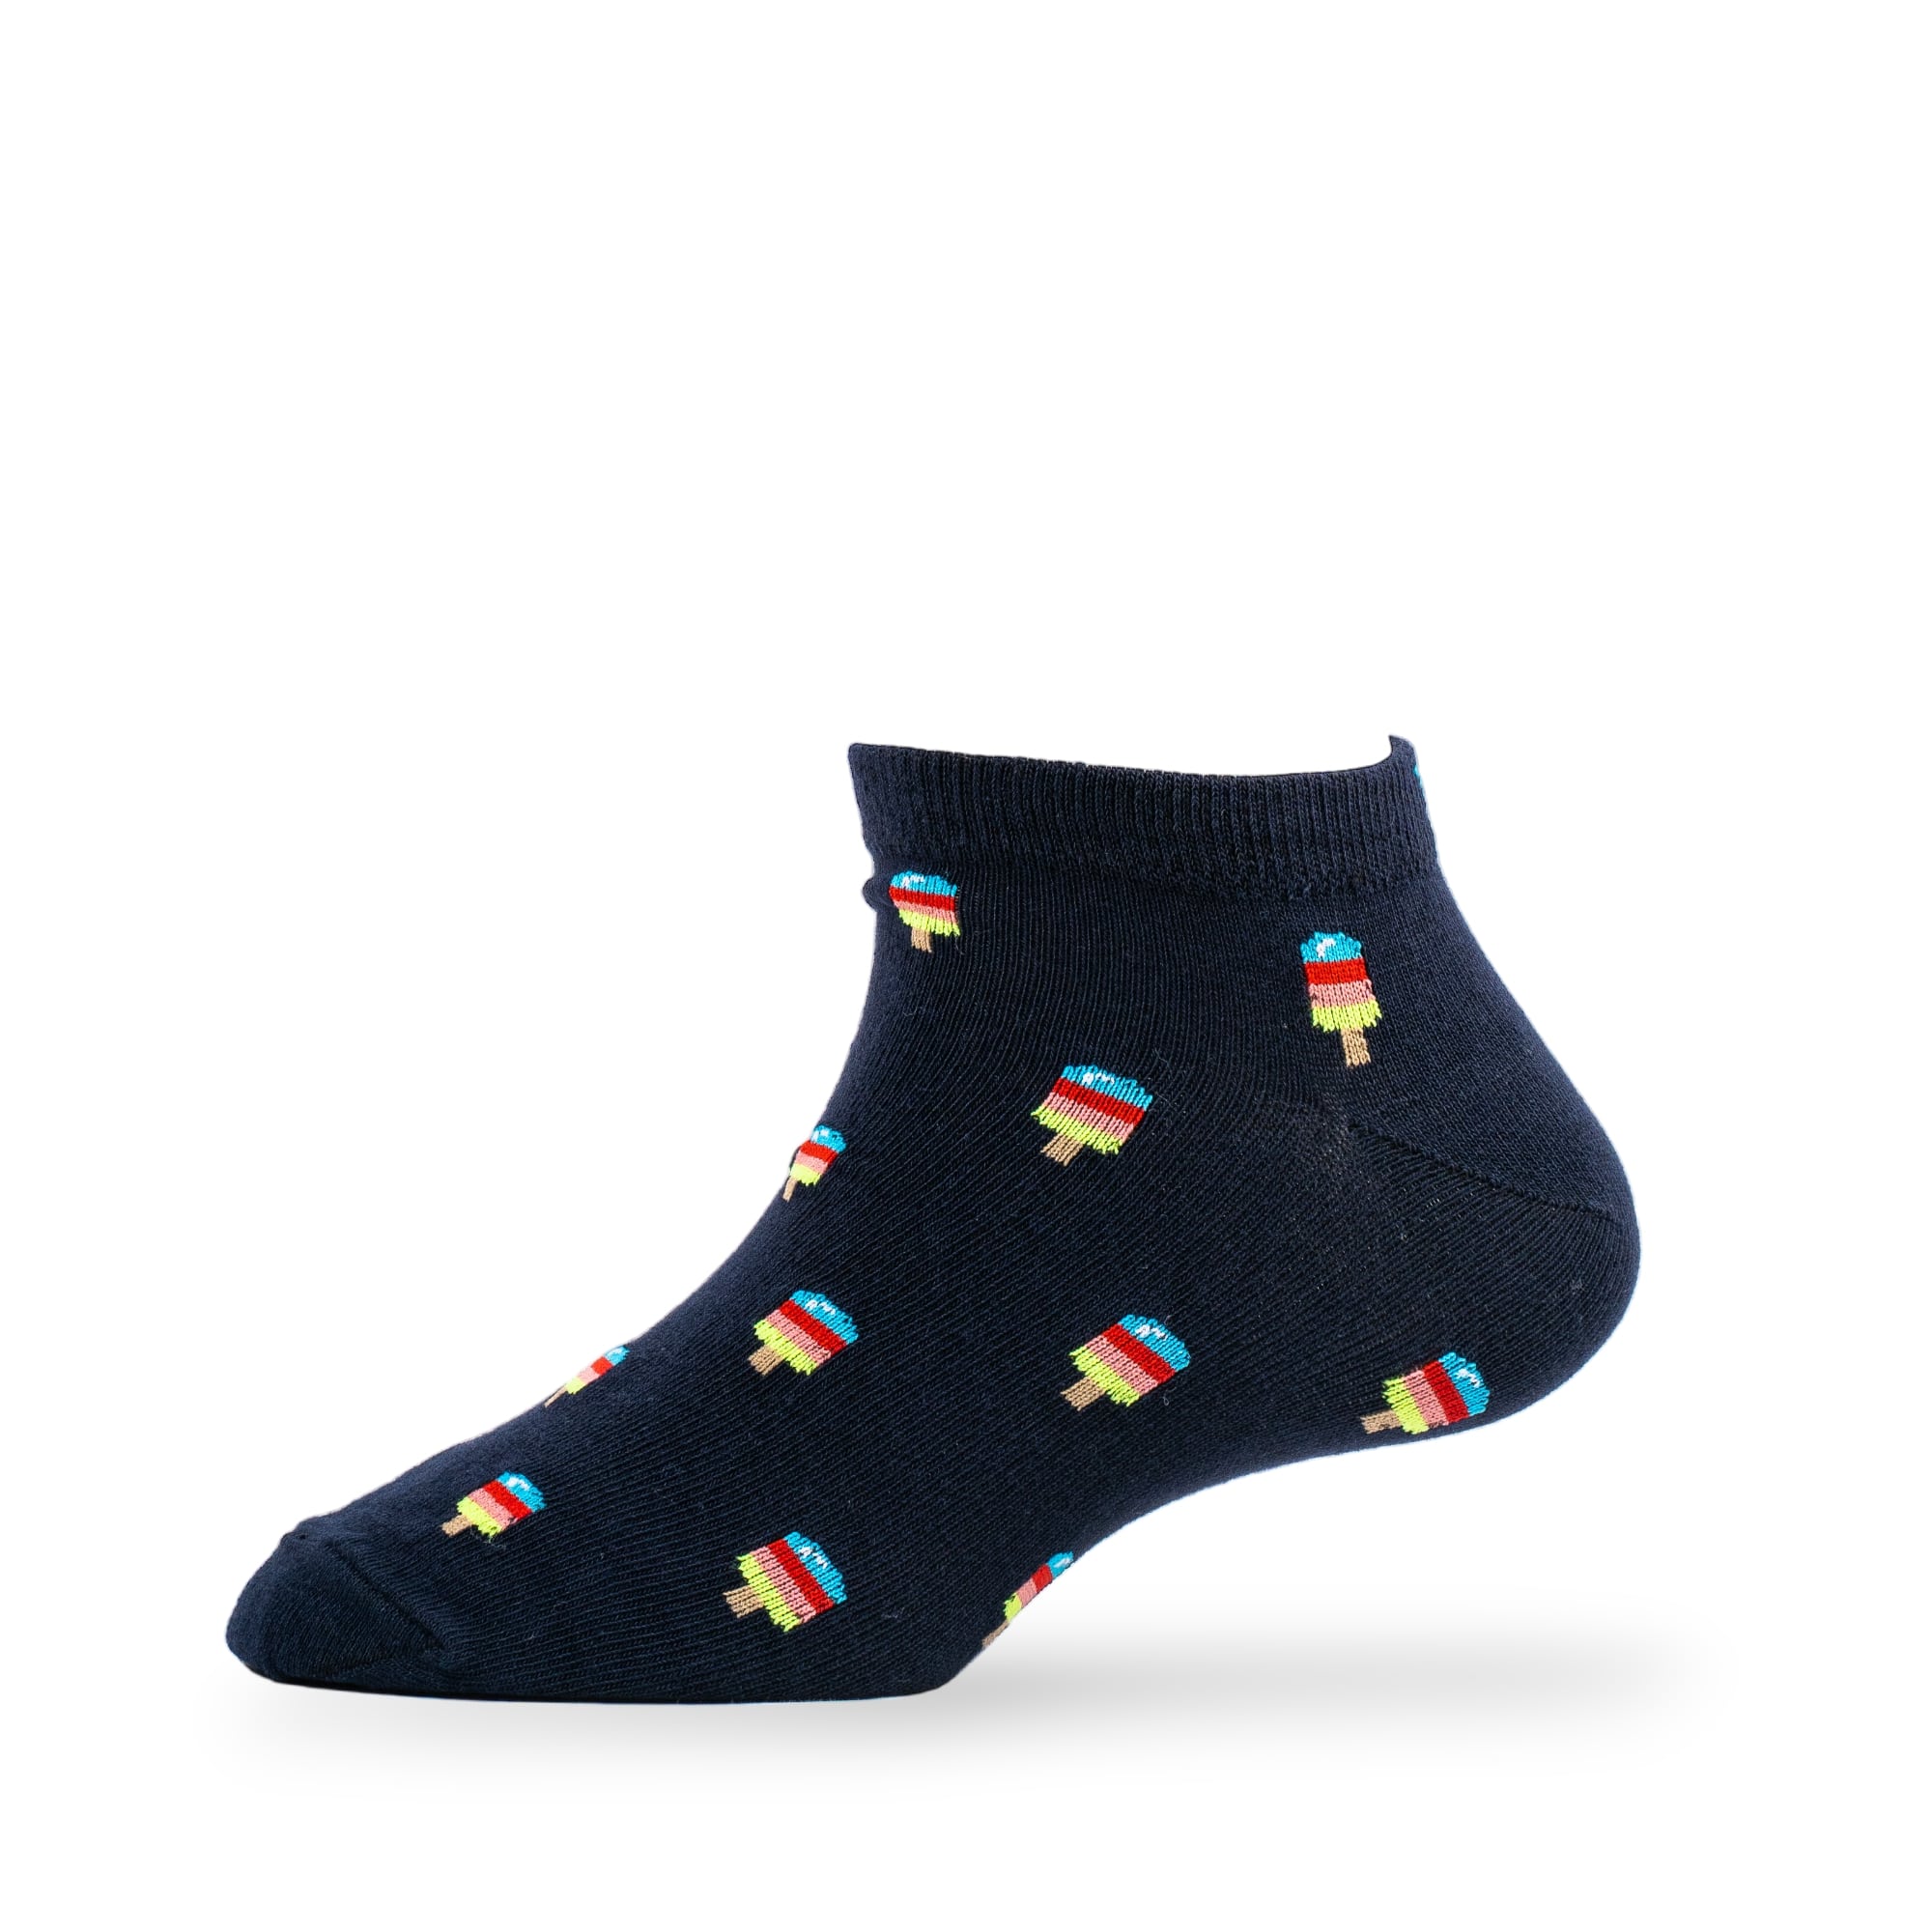 Young Wings Men's Multi Colour Cotton Fabric Design Low Ankle Length Socks - Pack of 5, Style no. M1-LC 0212 N